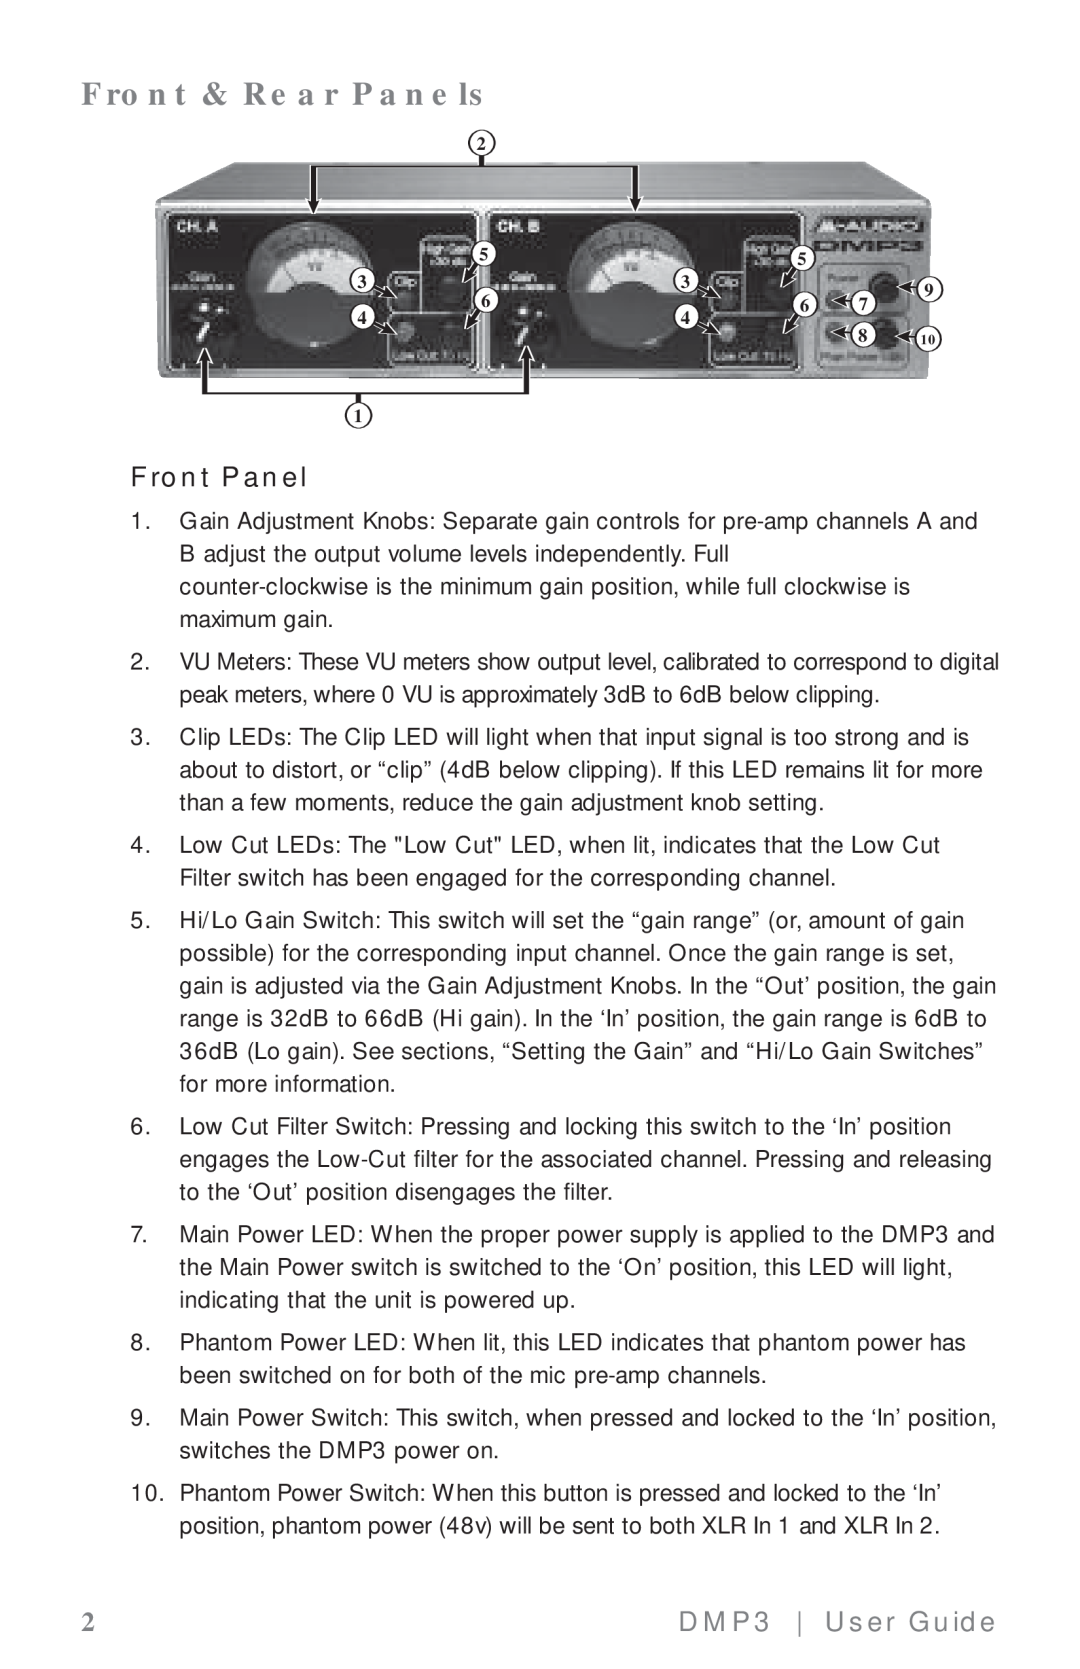 M-Audio manual Front & Rear Panels, Front Panel, DMP3 User Guide 